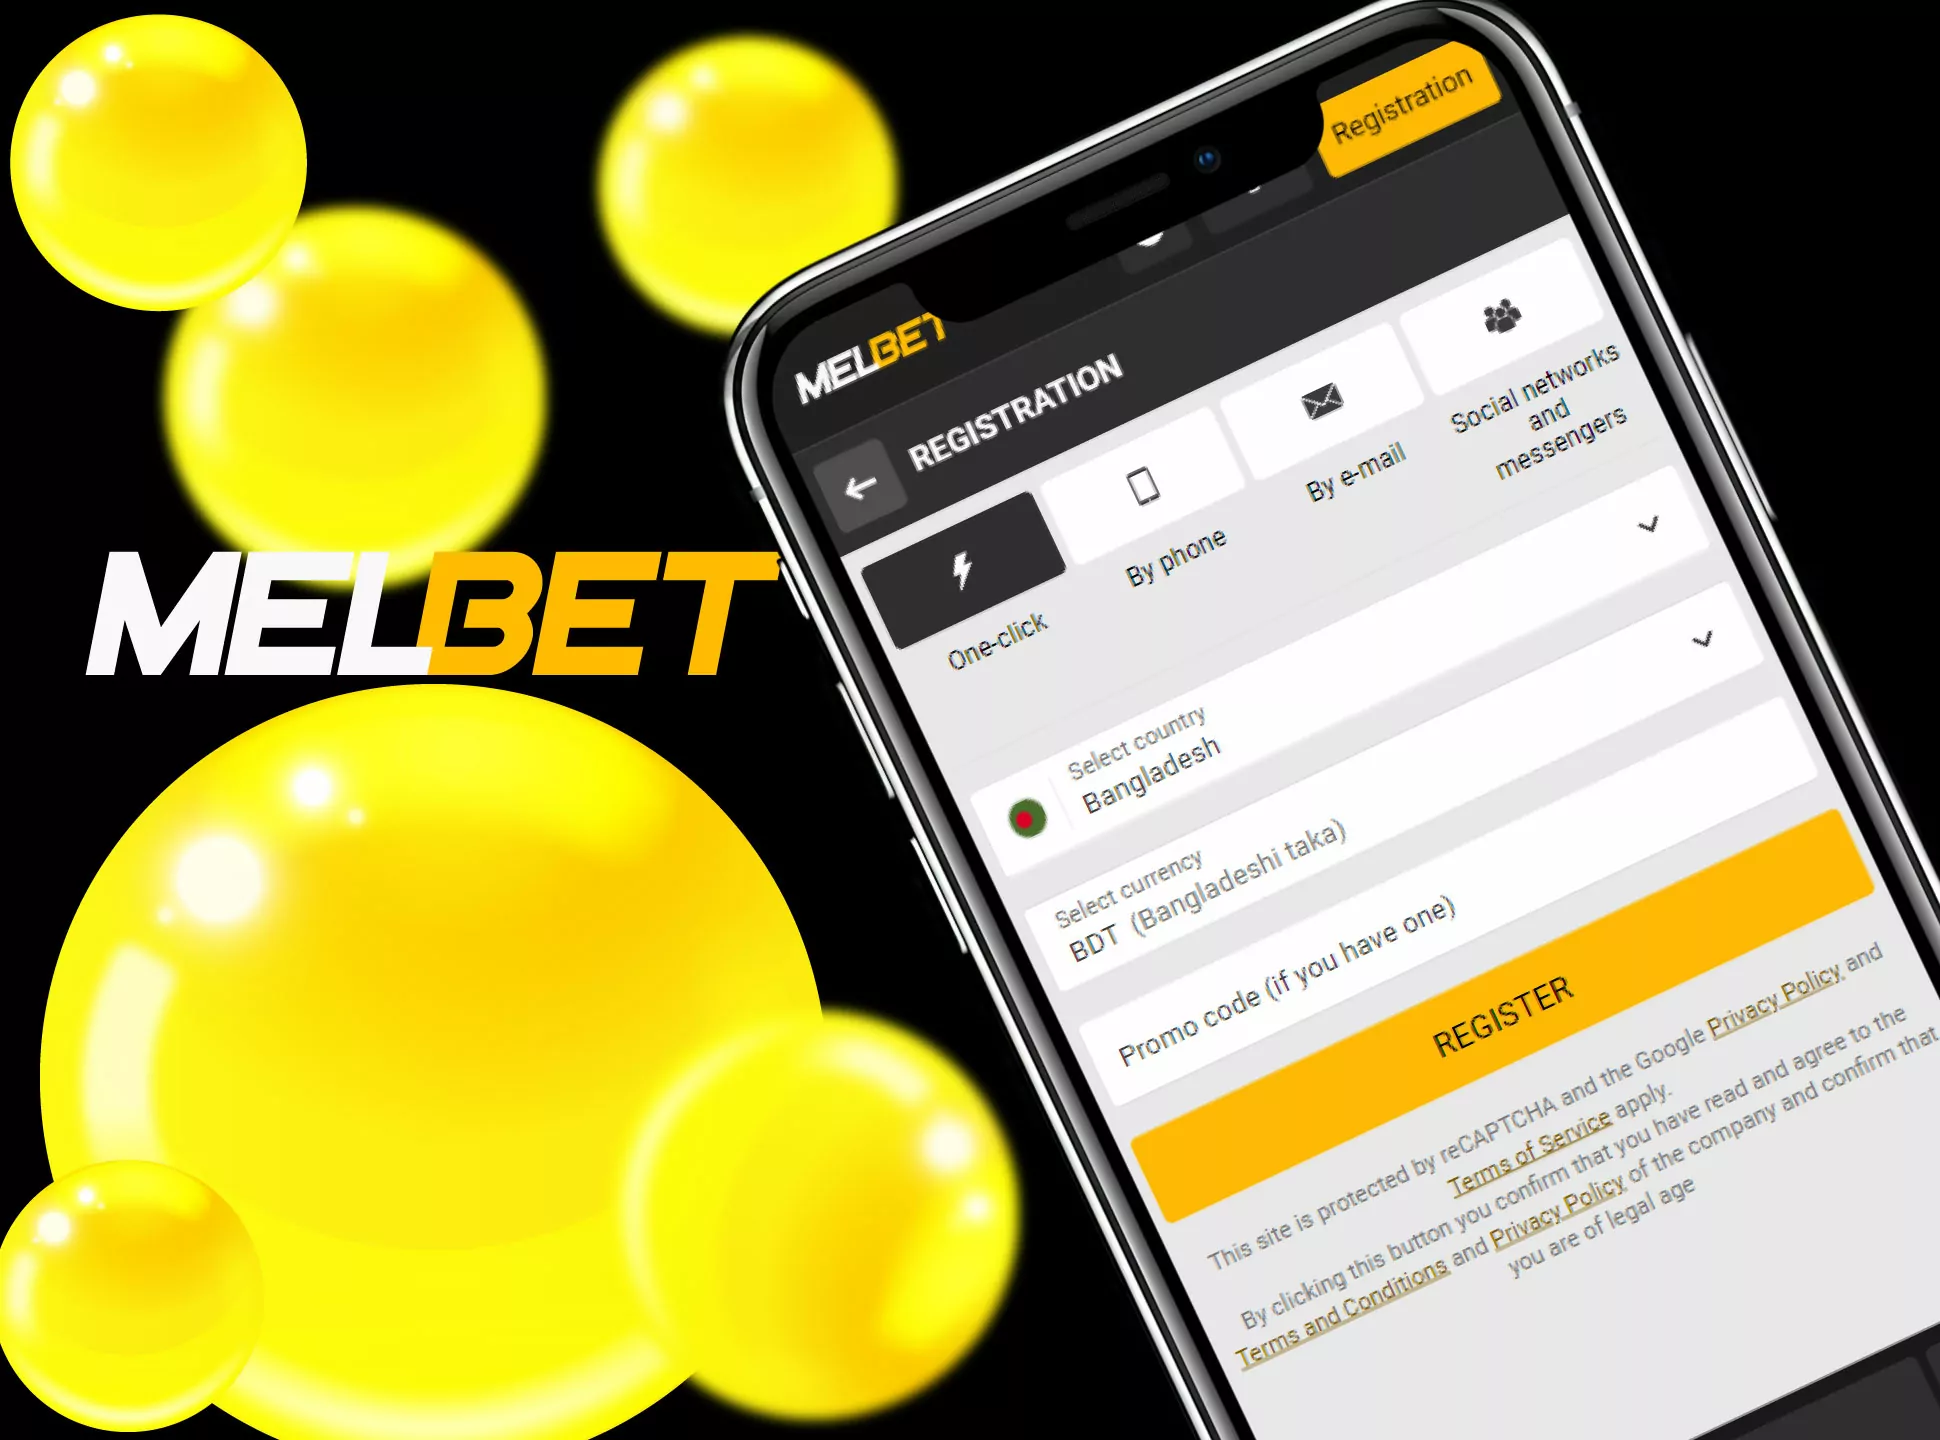 Make your registration process faster with Melbet casino app.